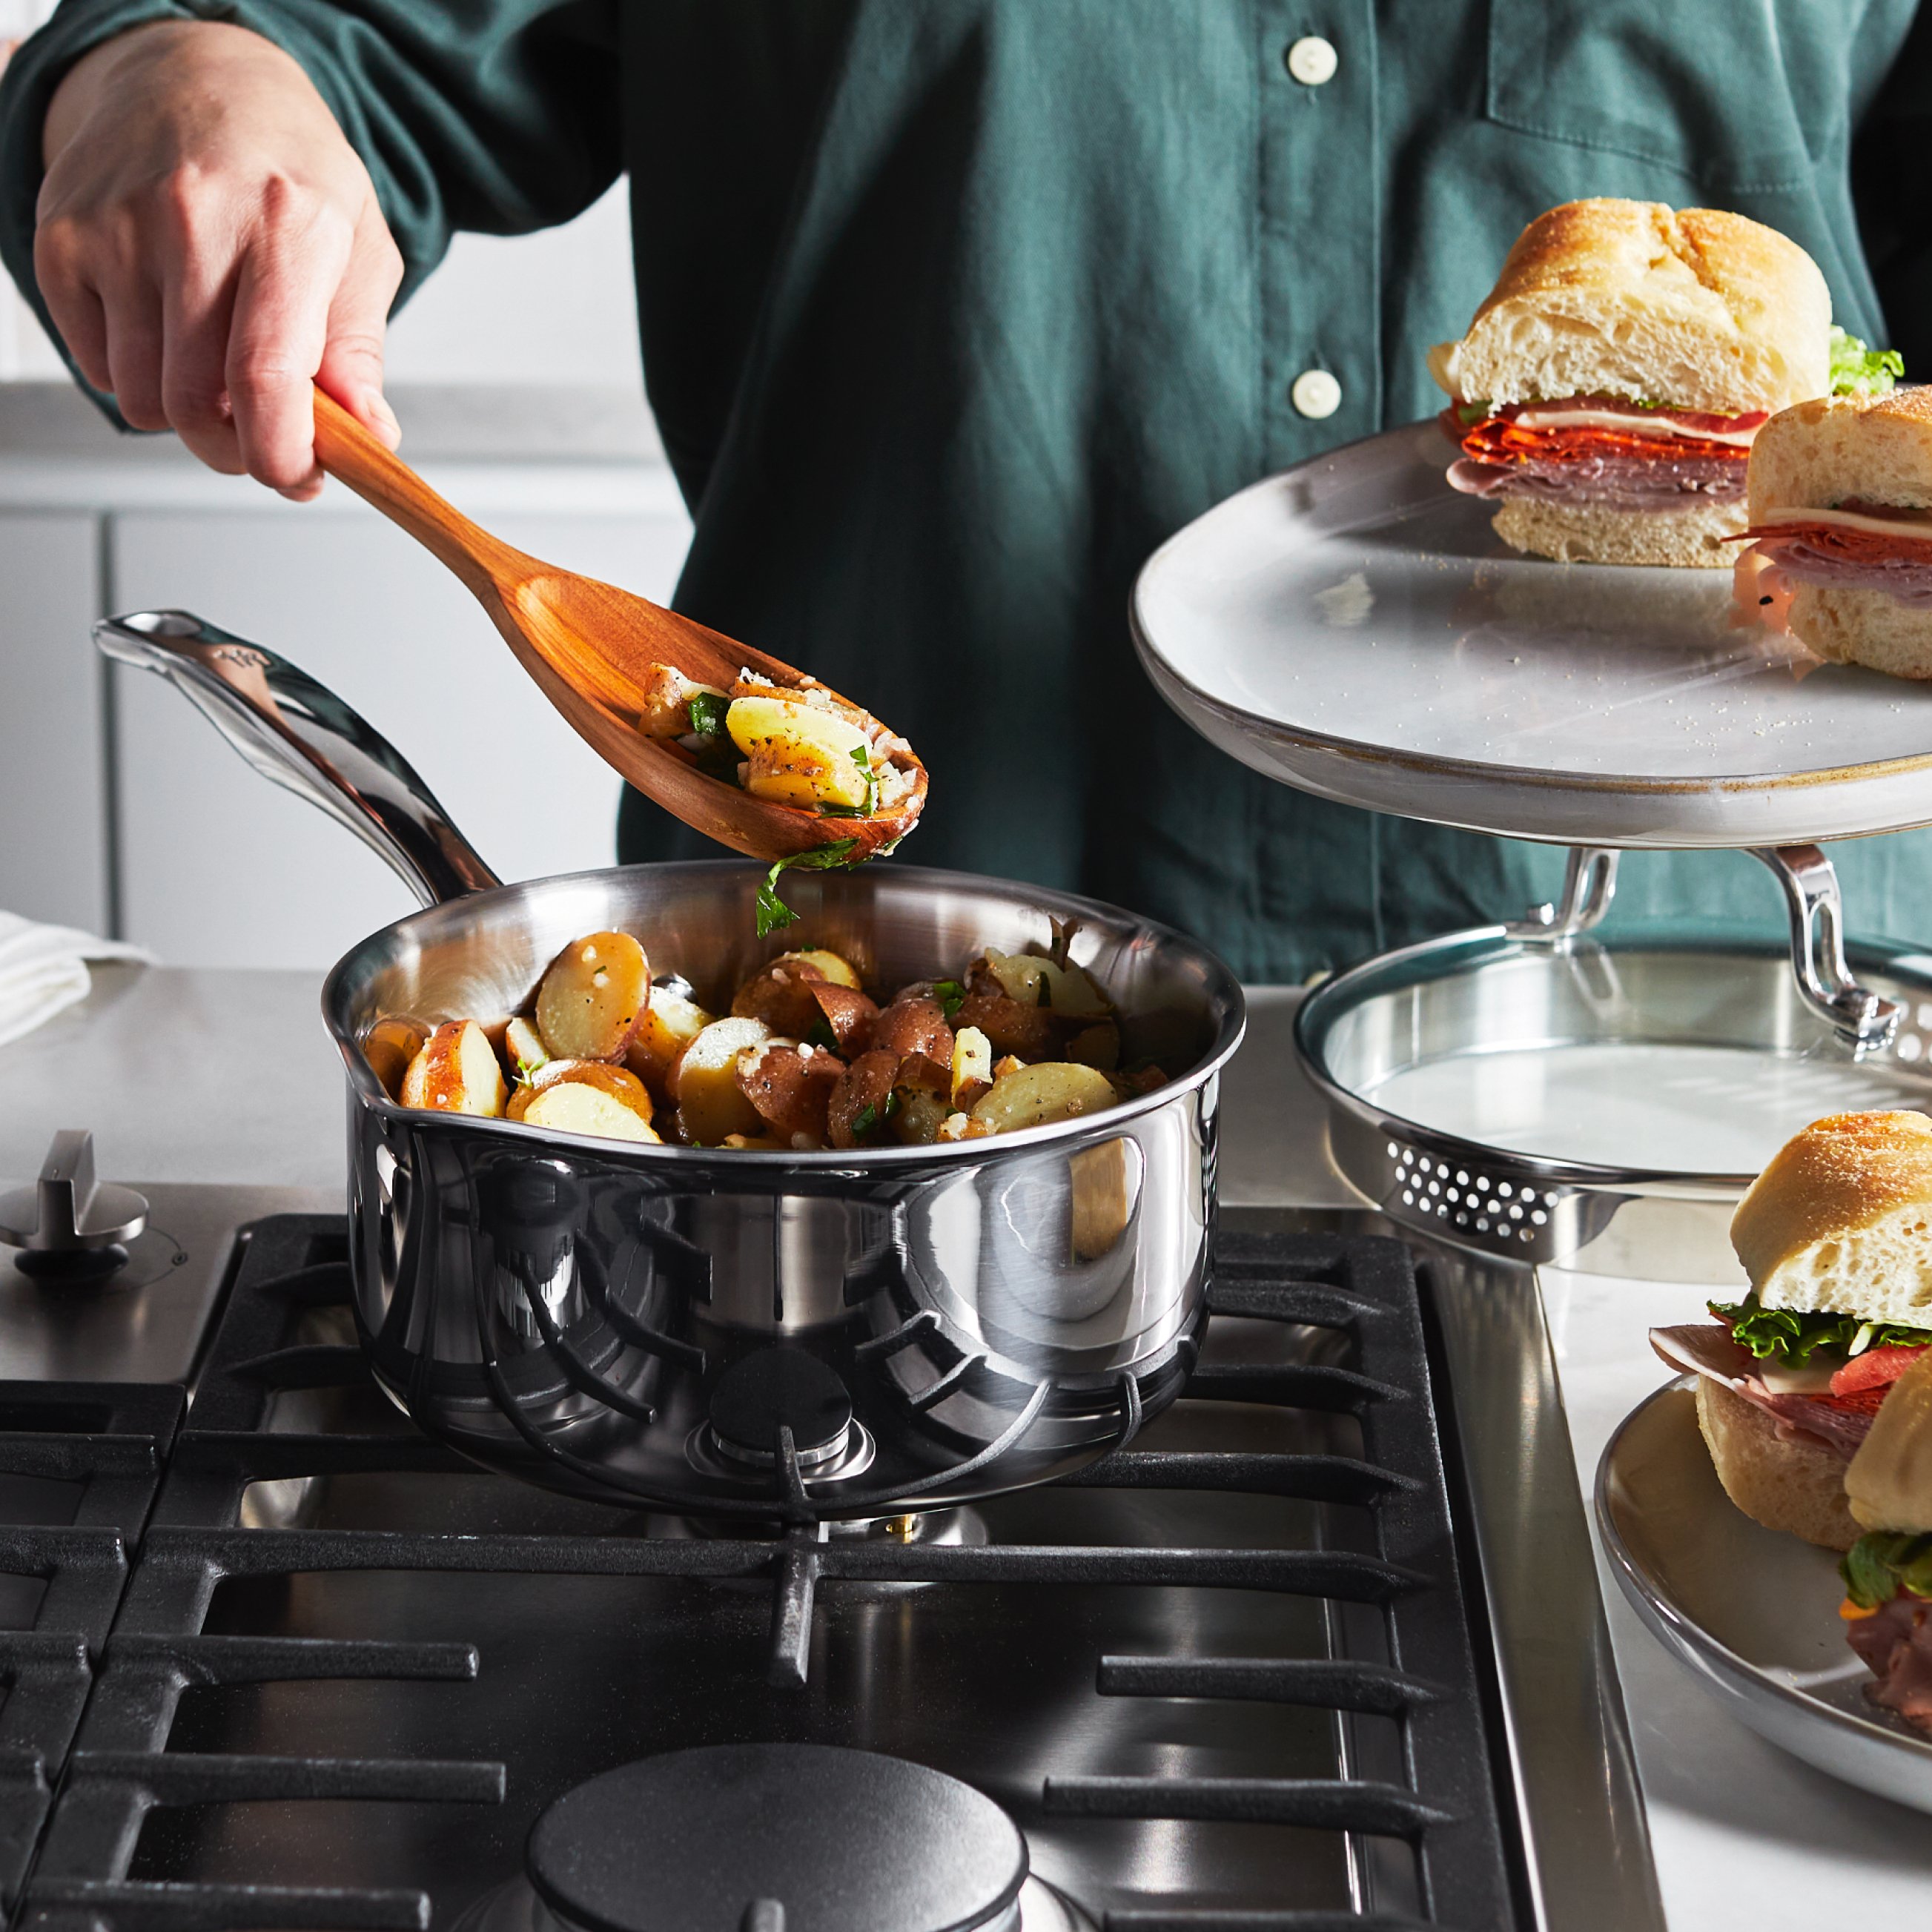 https://www.zwilling.com/on/demandware.static/-/Sites-zwilling-us-Library/default/dwf29bb238/images/product-content/masonry-content/henckels/cookware/henckels-h3/H3UNCOATED_03.jpg